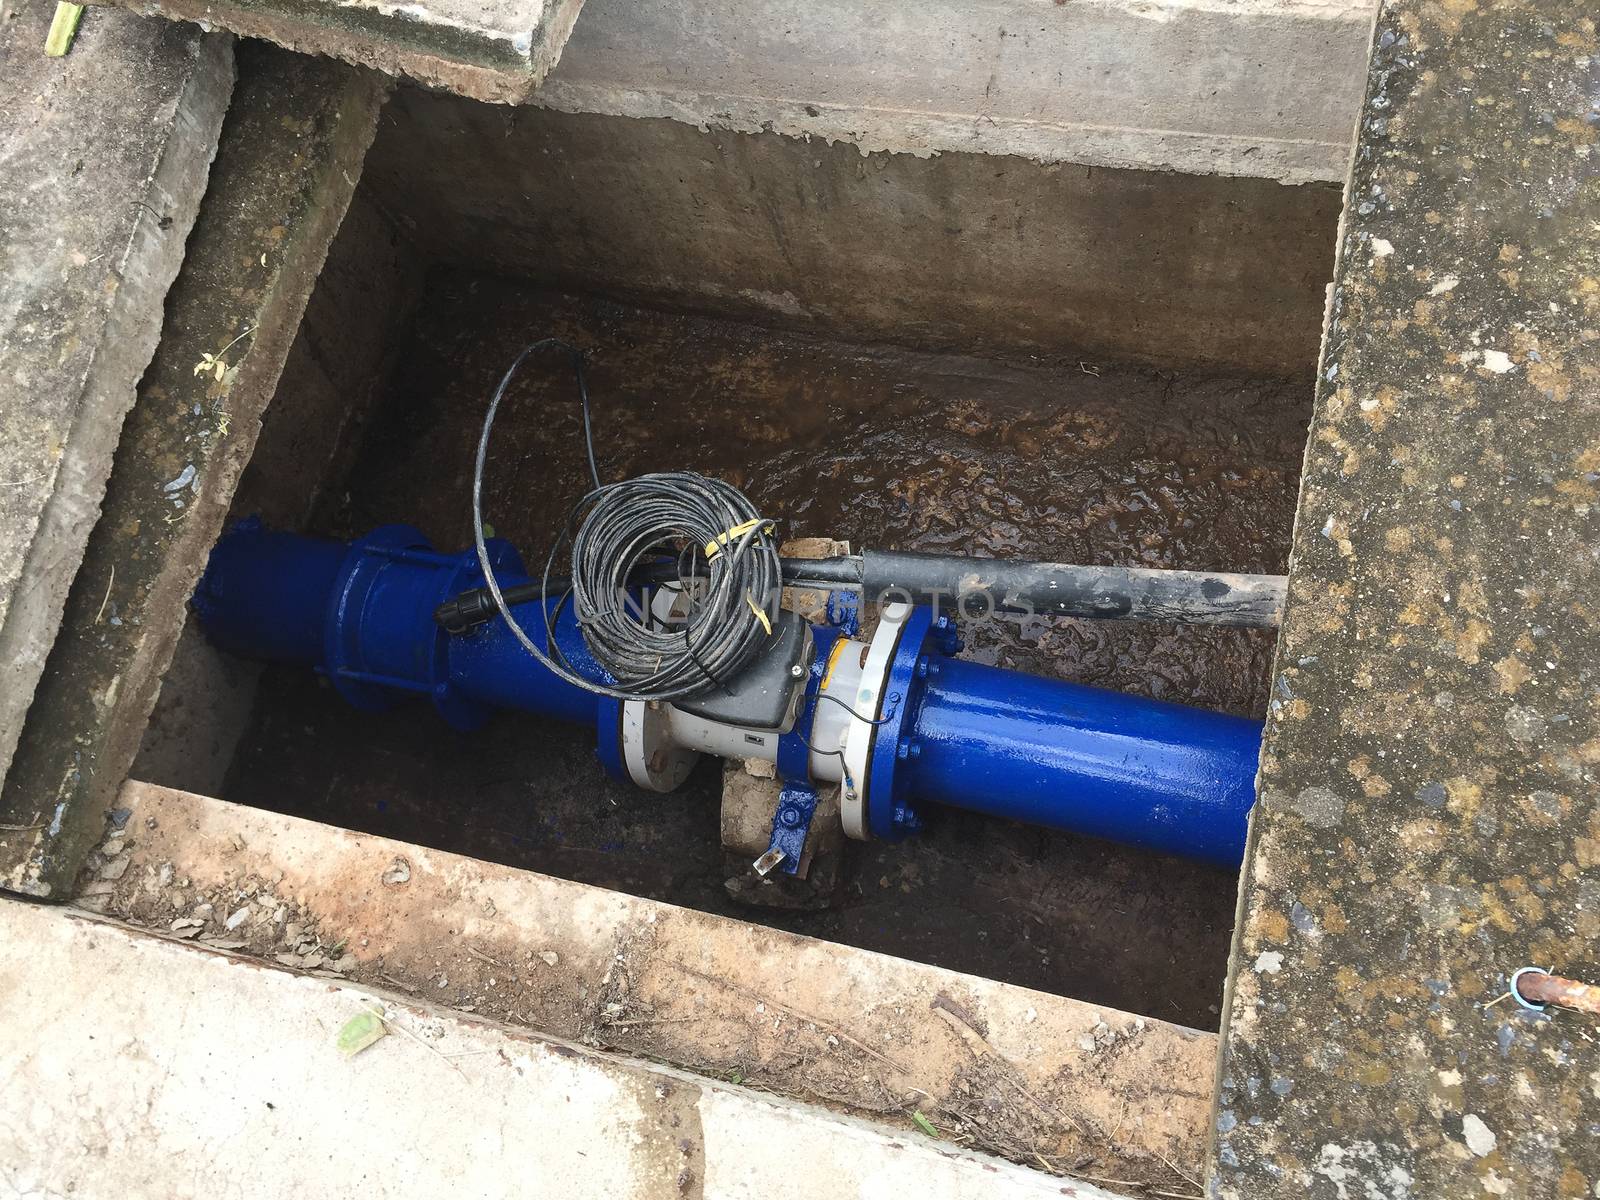 electromagnetic flow meter installed in the ground.